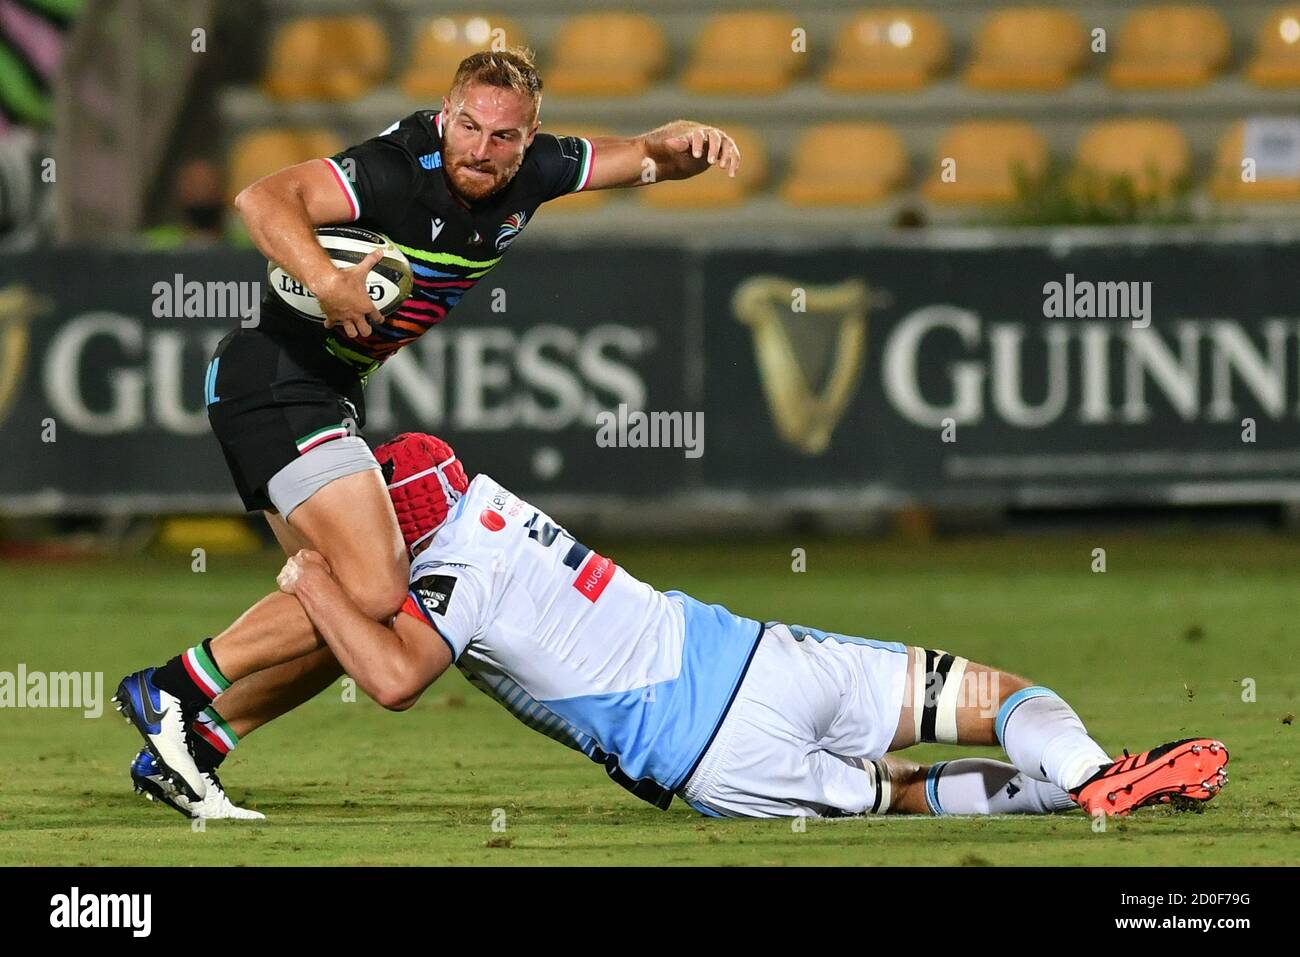 Parma, Italy. 02nd Oct, 2020. Captains battle: Giulio Bisegni (Zebre) stopped by Cory Hilli (Cardiff Blues) during Zebre vs Cardiff Blues, Rugby Guinness Pro 14 in parma, Italy, October 02 2020 Credit: Independent Photo Agency/Alamy Live News Stock Photo